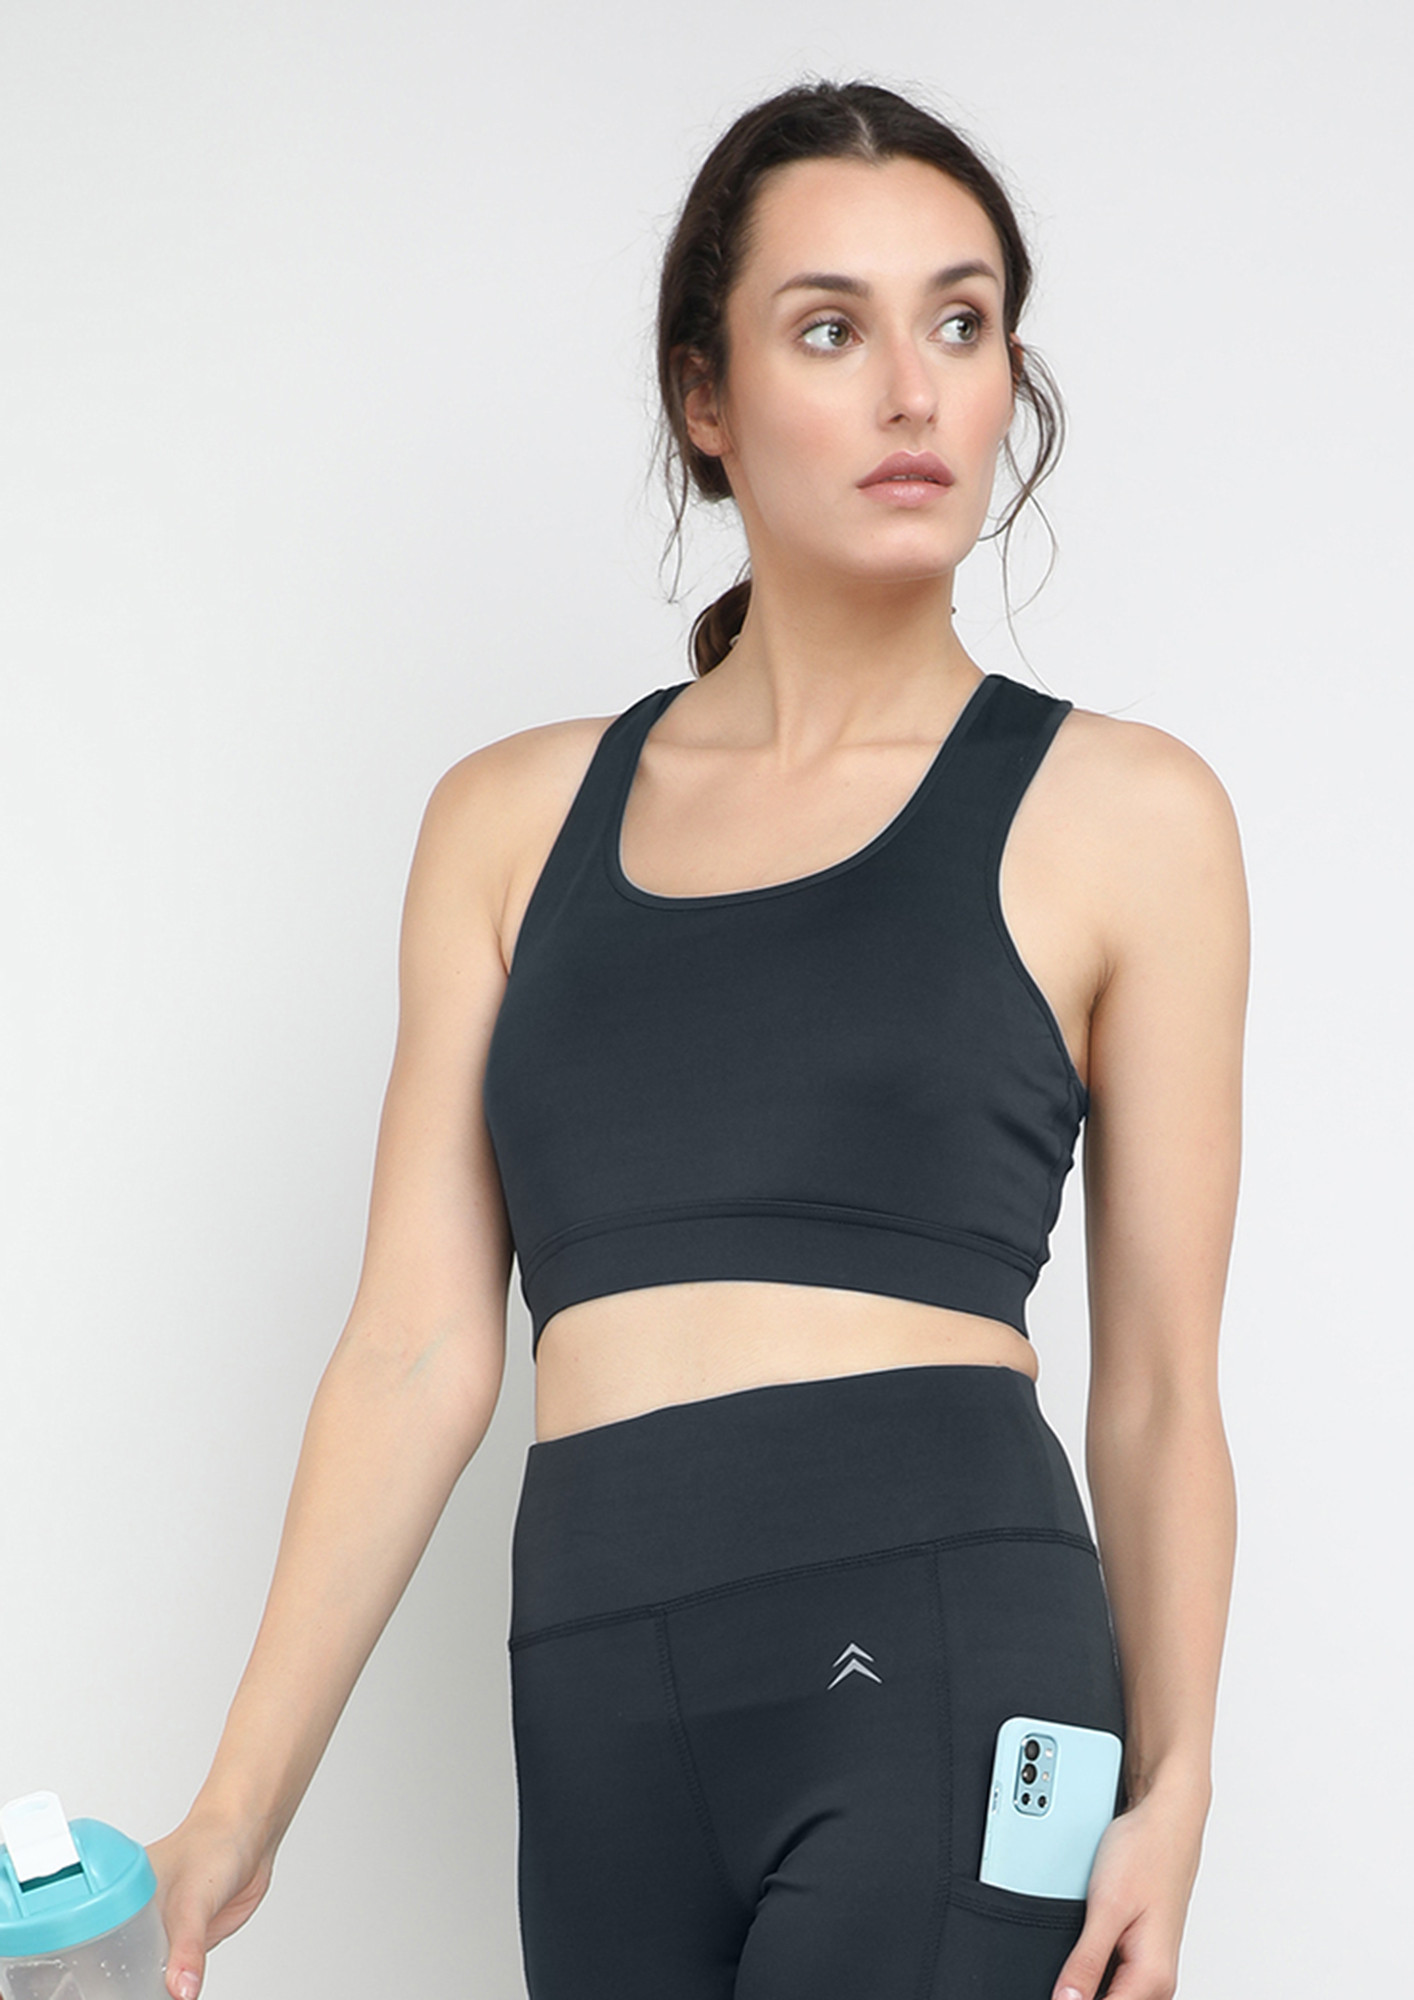 YOU KNOW THE DRILL CHARCOAL GREY SPORTS BRA